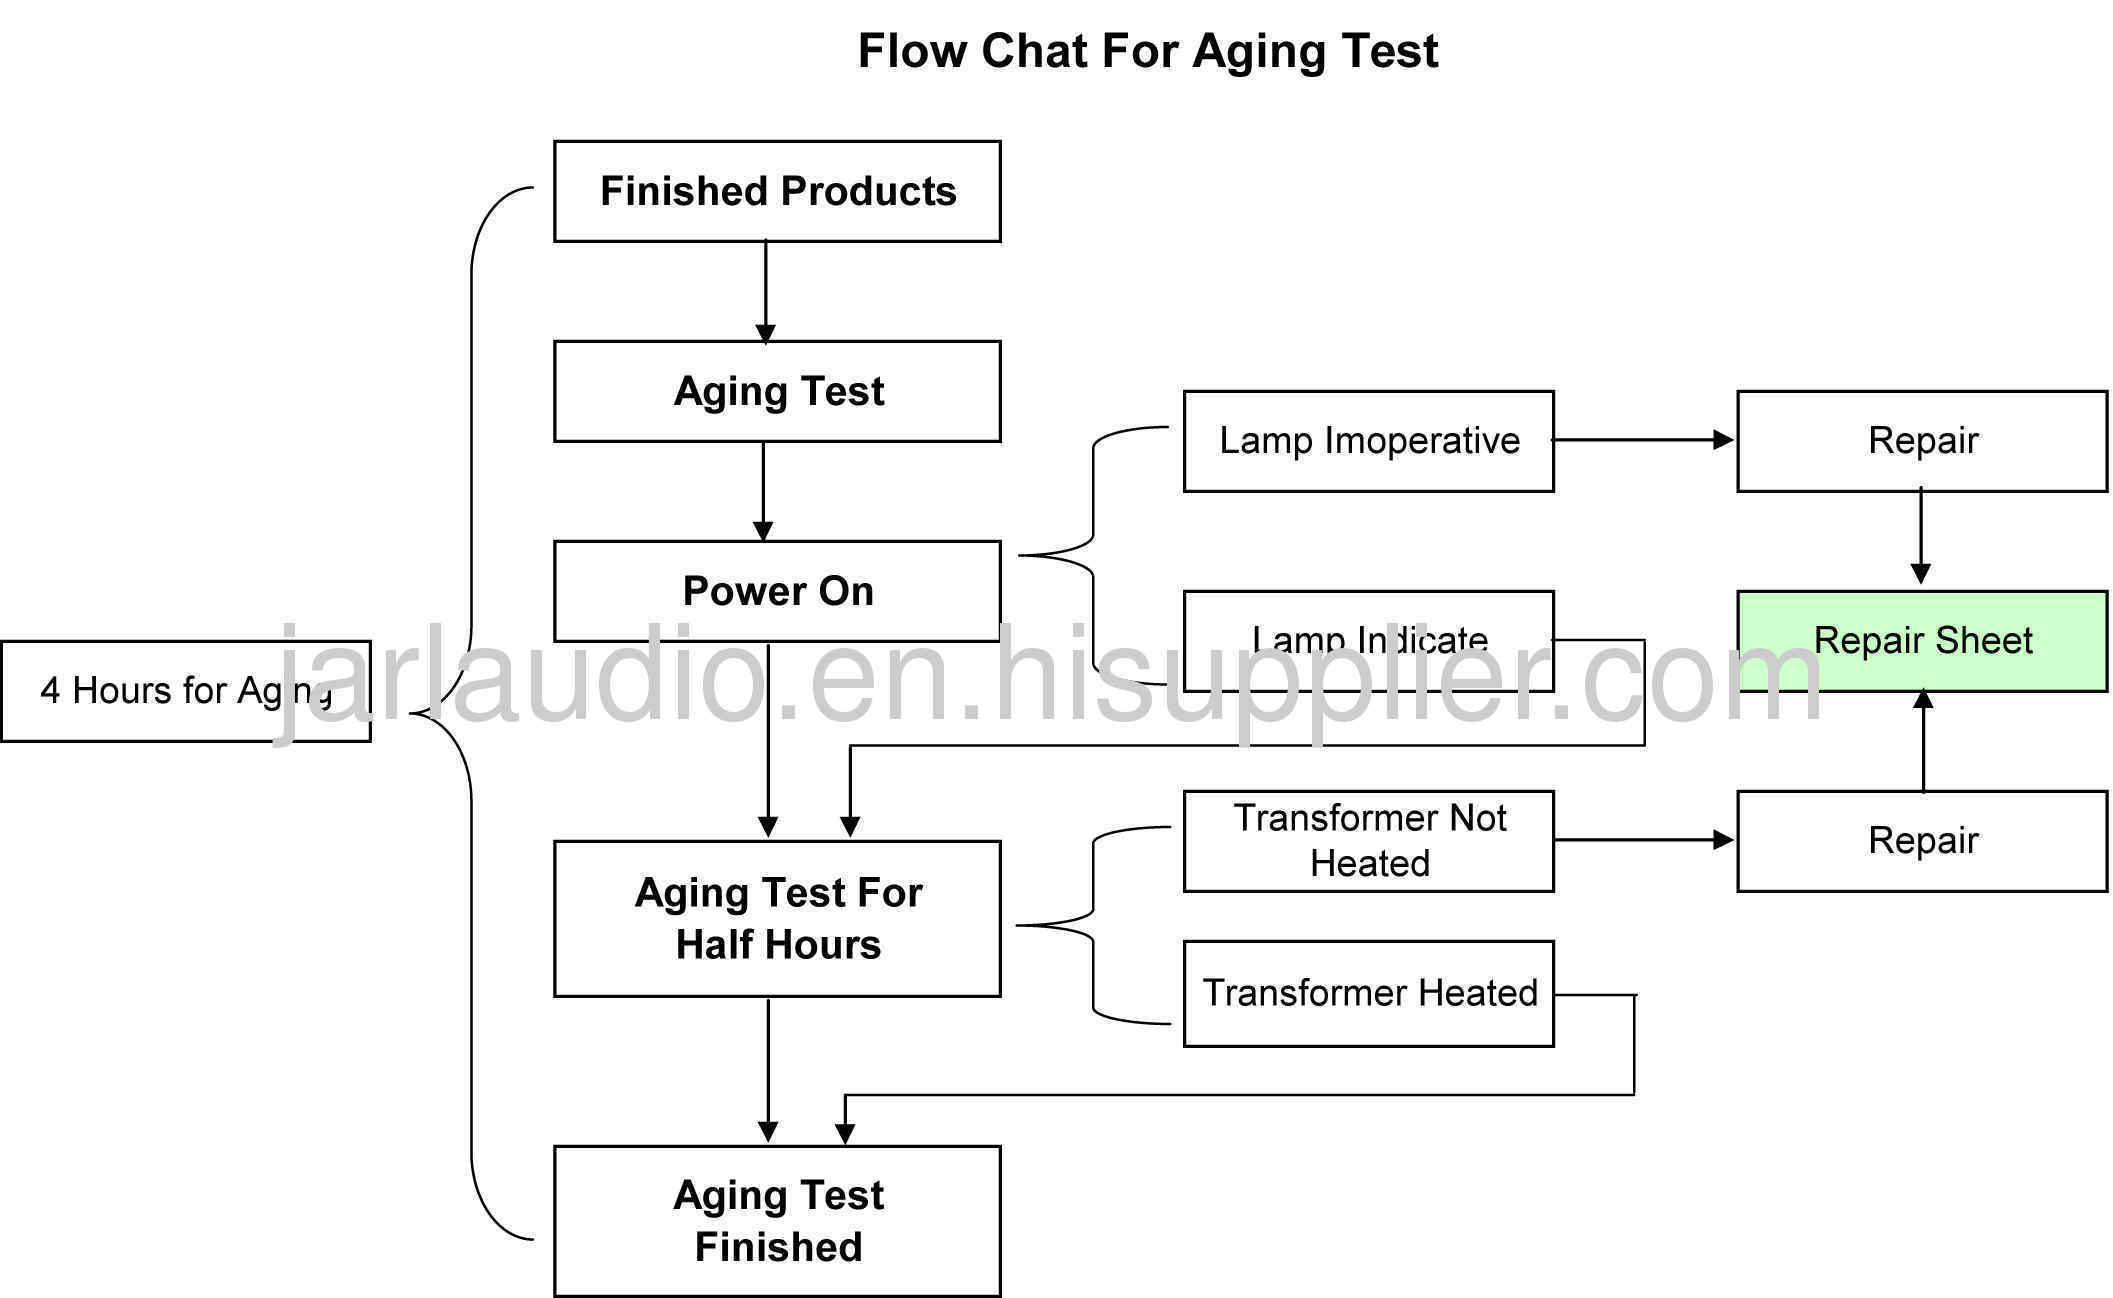 Flow Chat for Aging Test